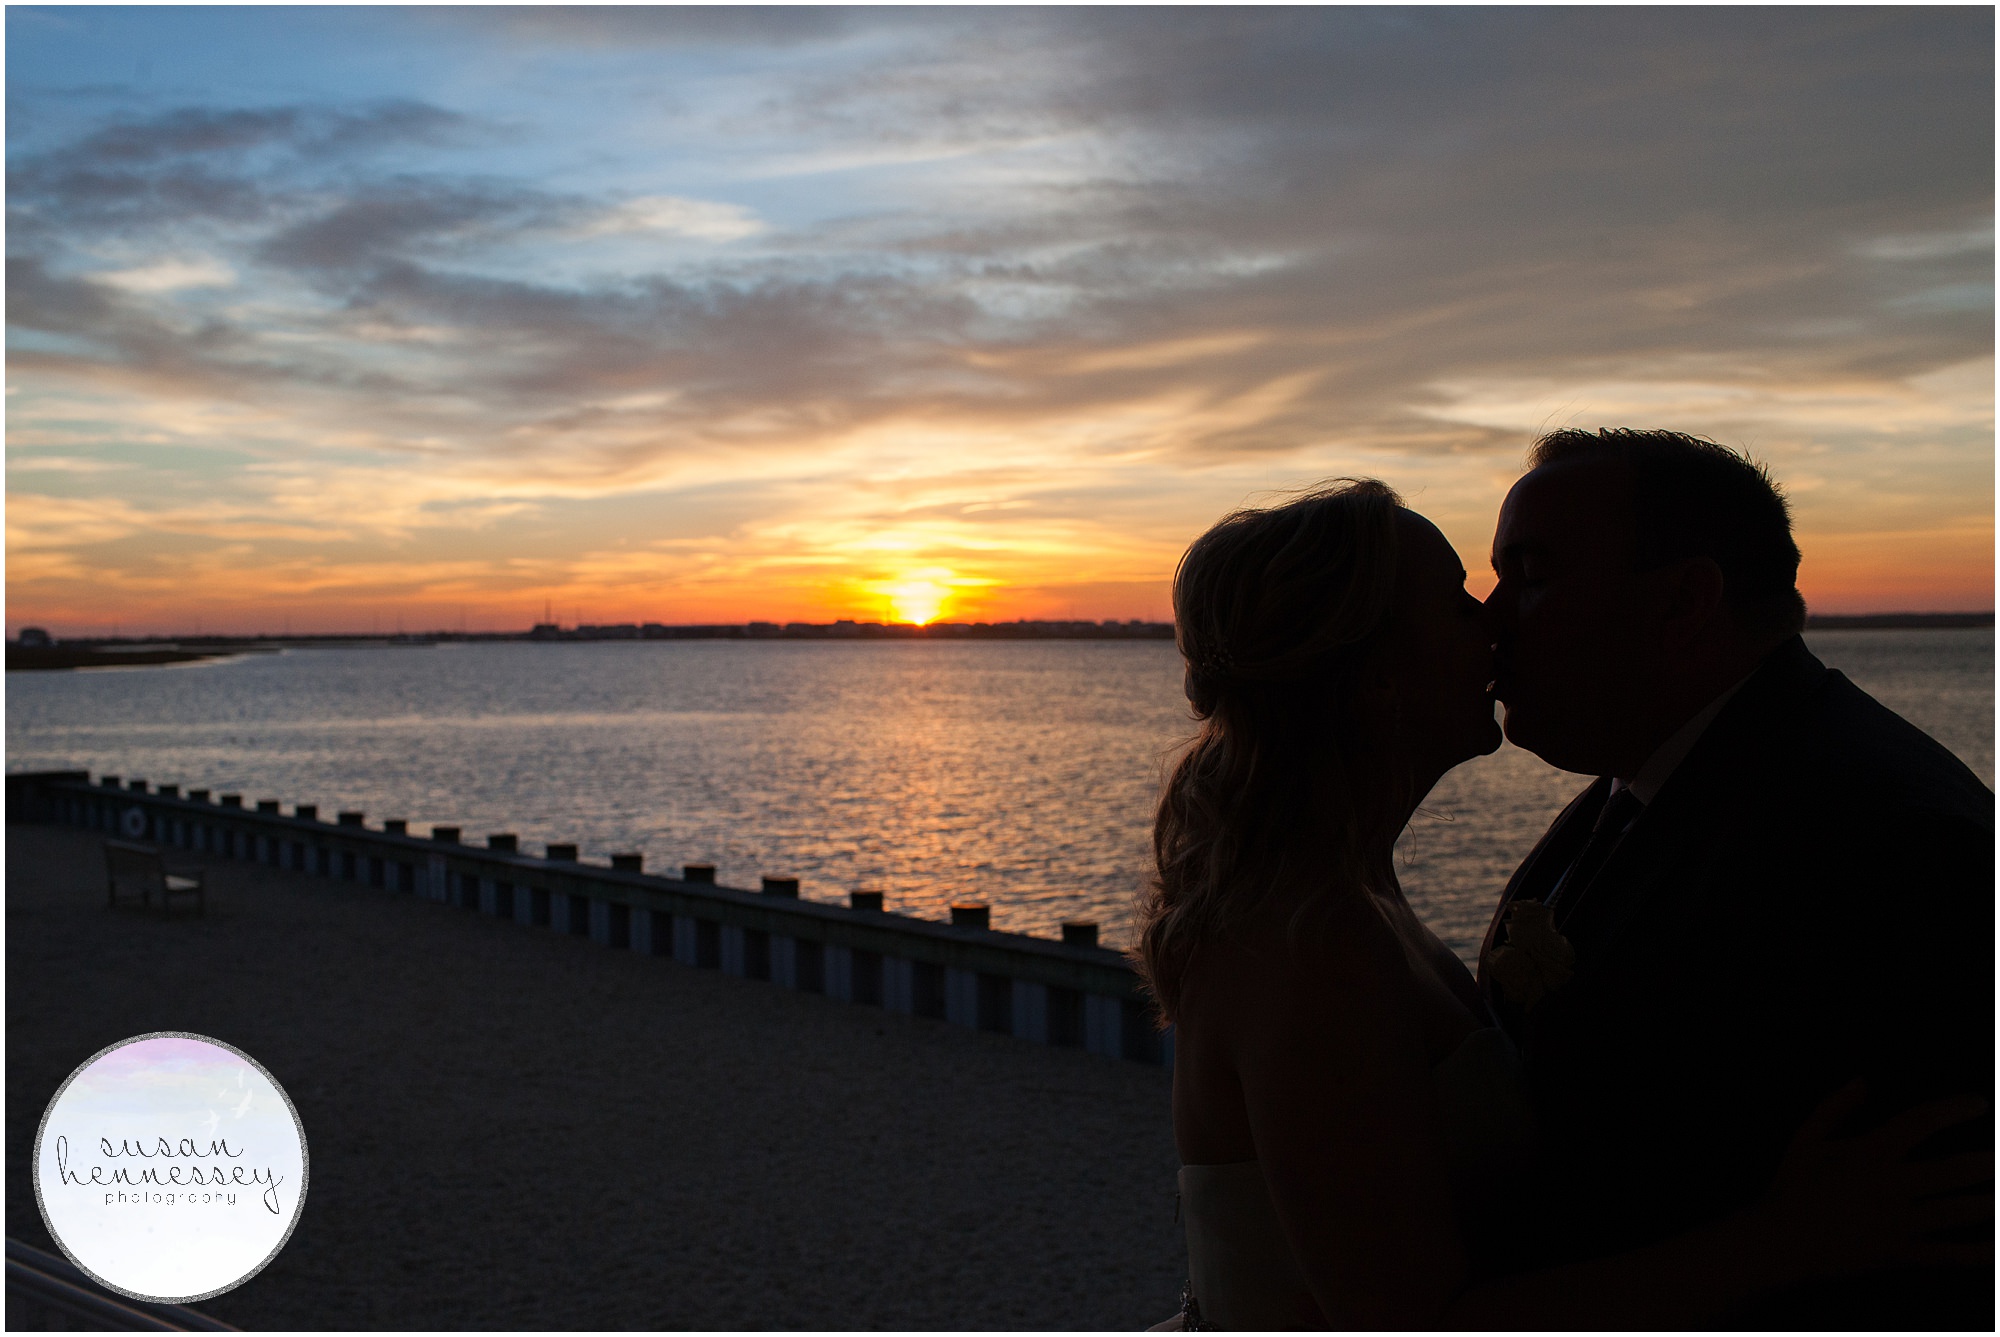 Avalon Yacht Club is one of the Best Jersey Shore Wedding Venues because of the stunning sunset views.